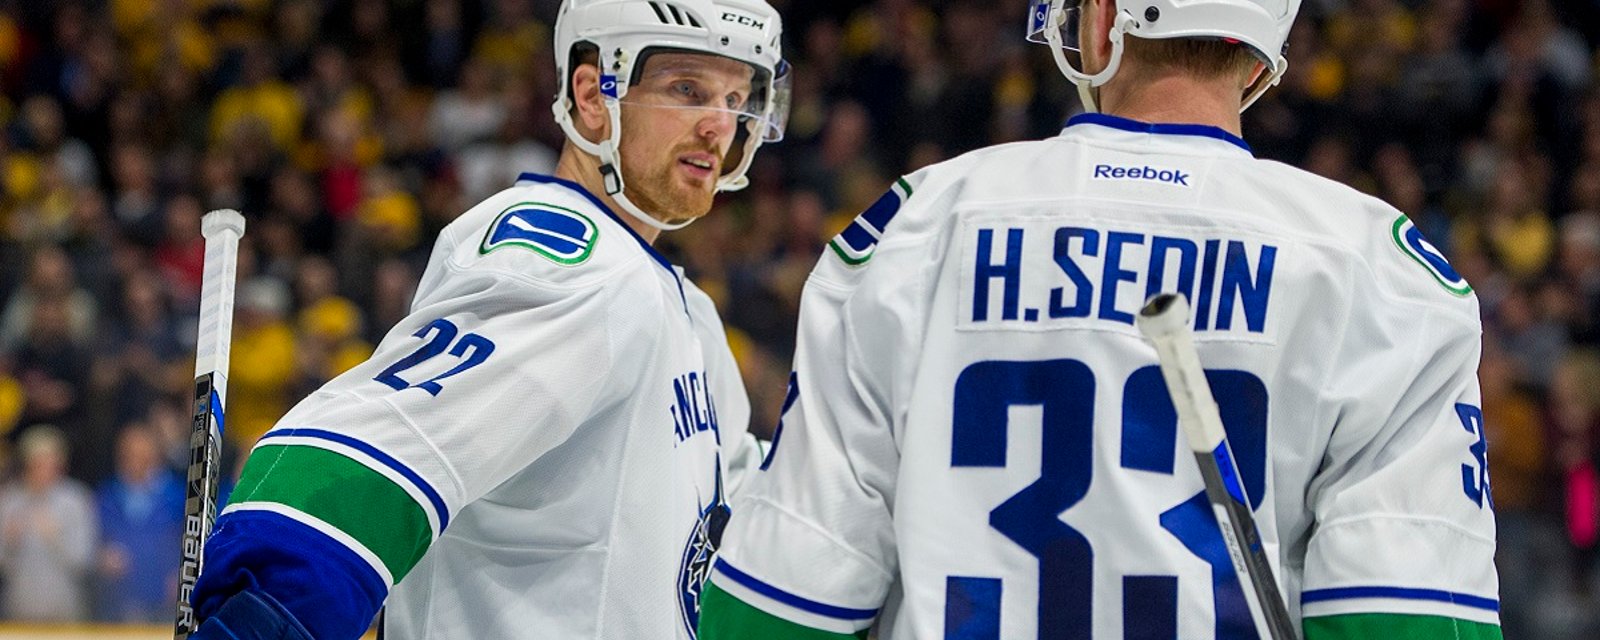 Insider makes bold prediction about the Sedins, while slamming their critics.